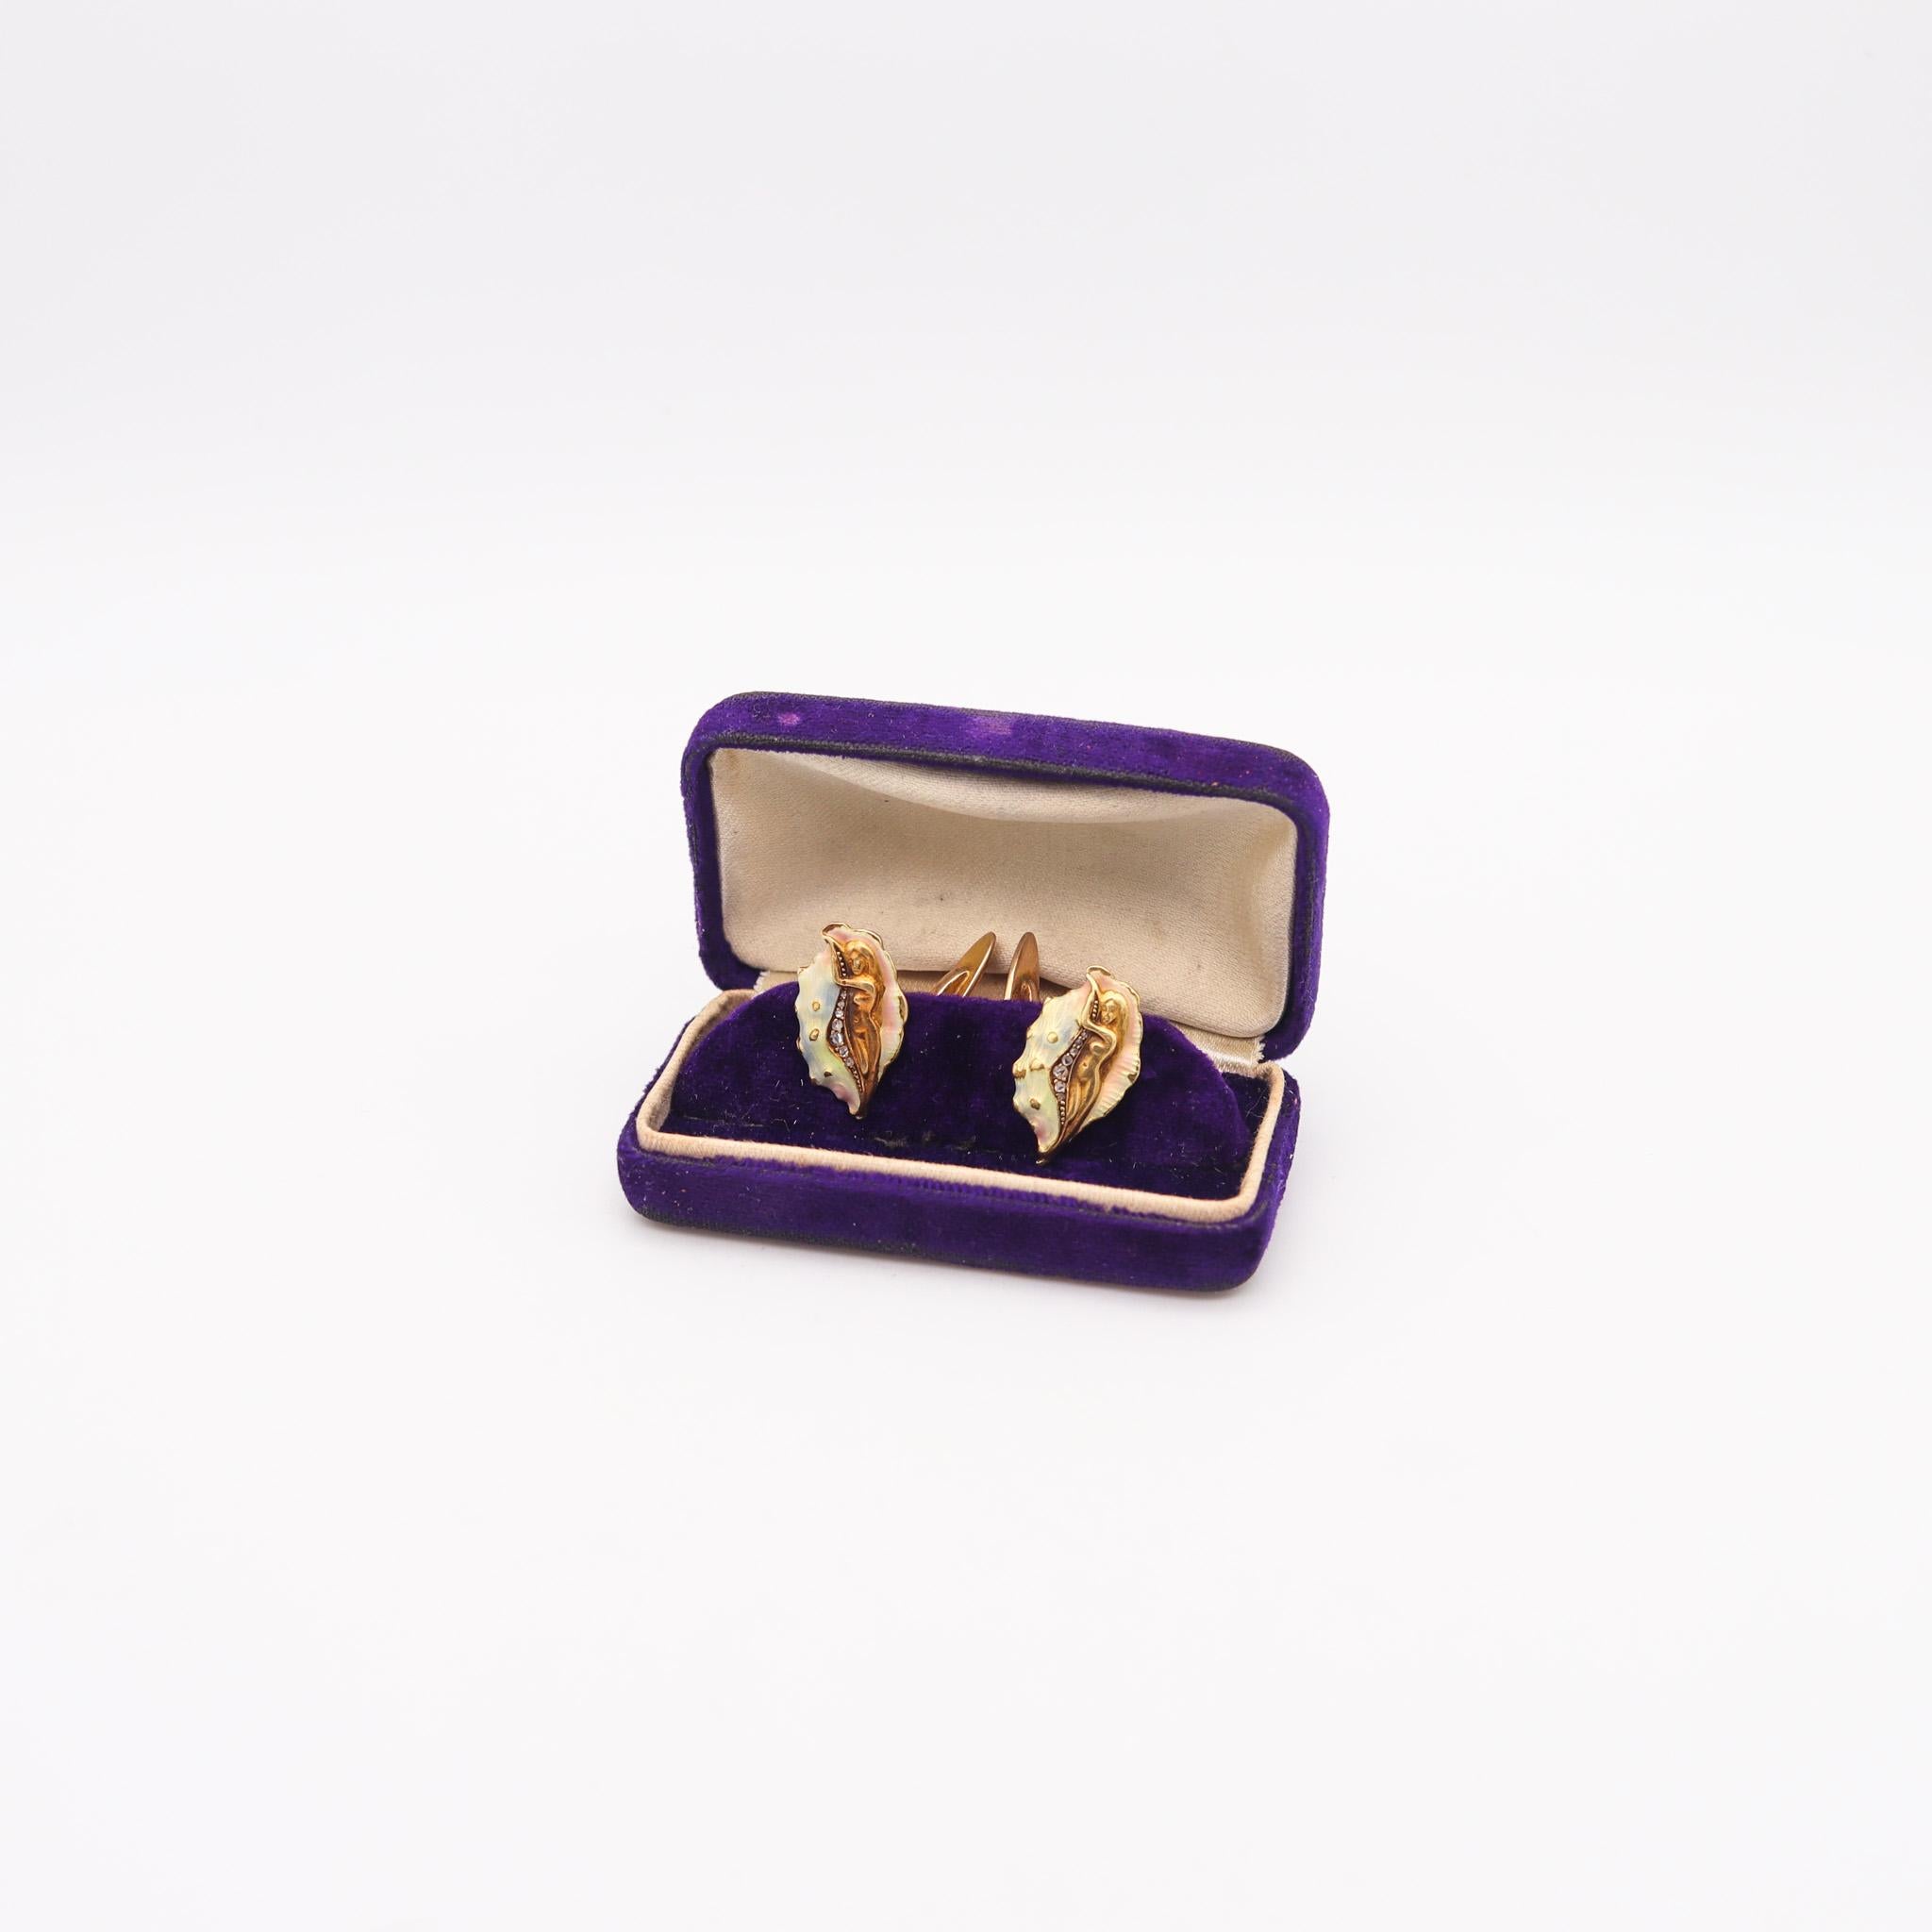 Germany 1900 Art Nouveau Enameled Cufflinks In 18Kt Gold With Diamonds With Box For Sale 2